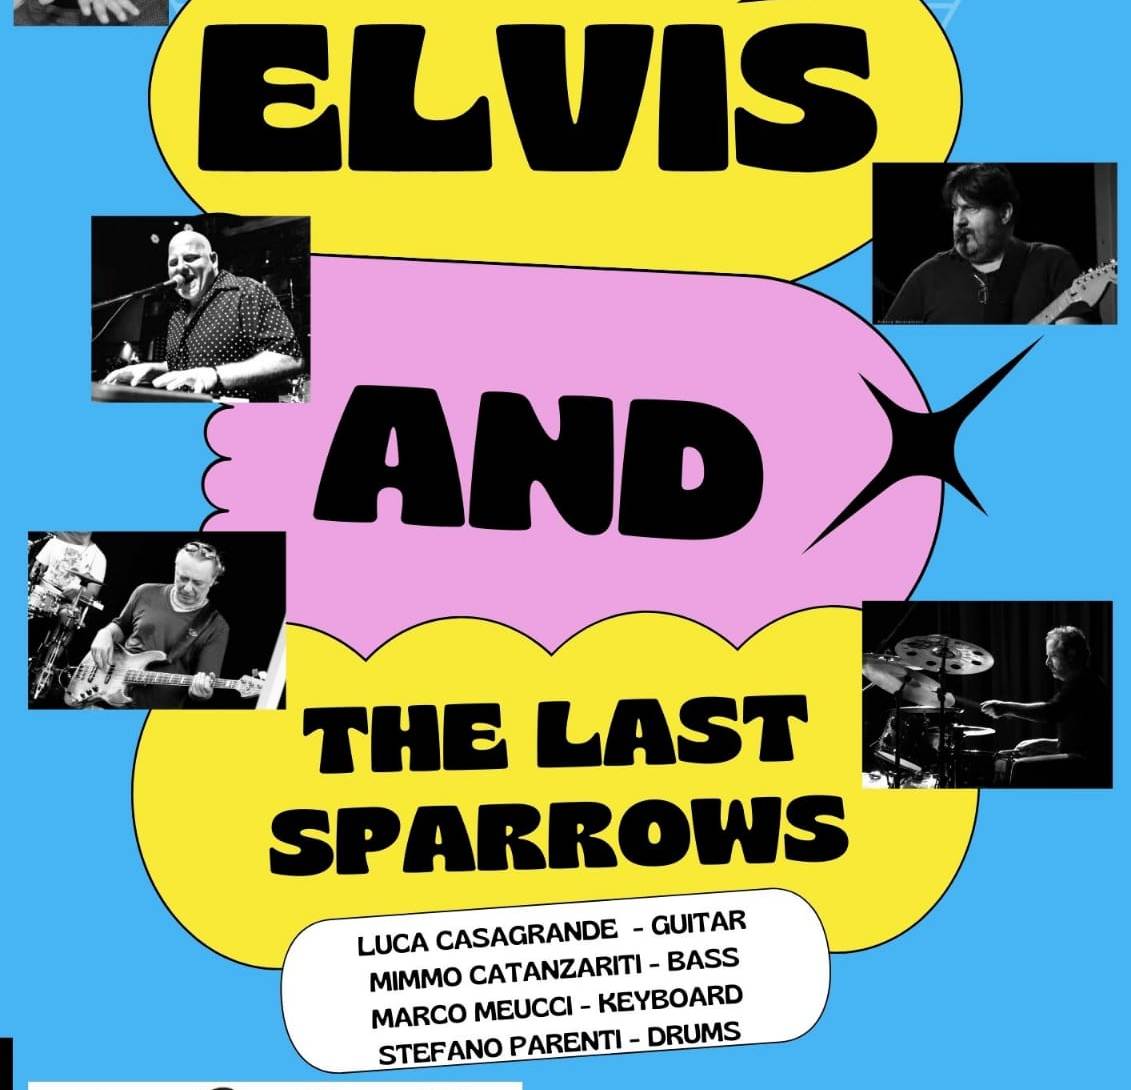 Rock’n Roll anni 50 con Elvis and the Last Sparrows